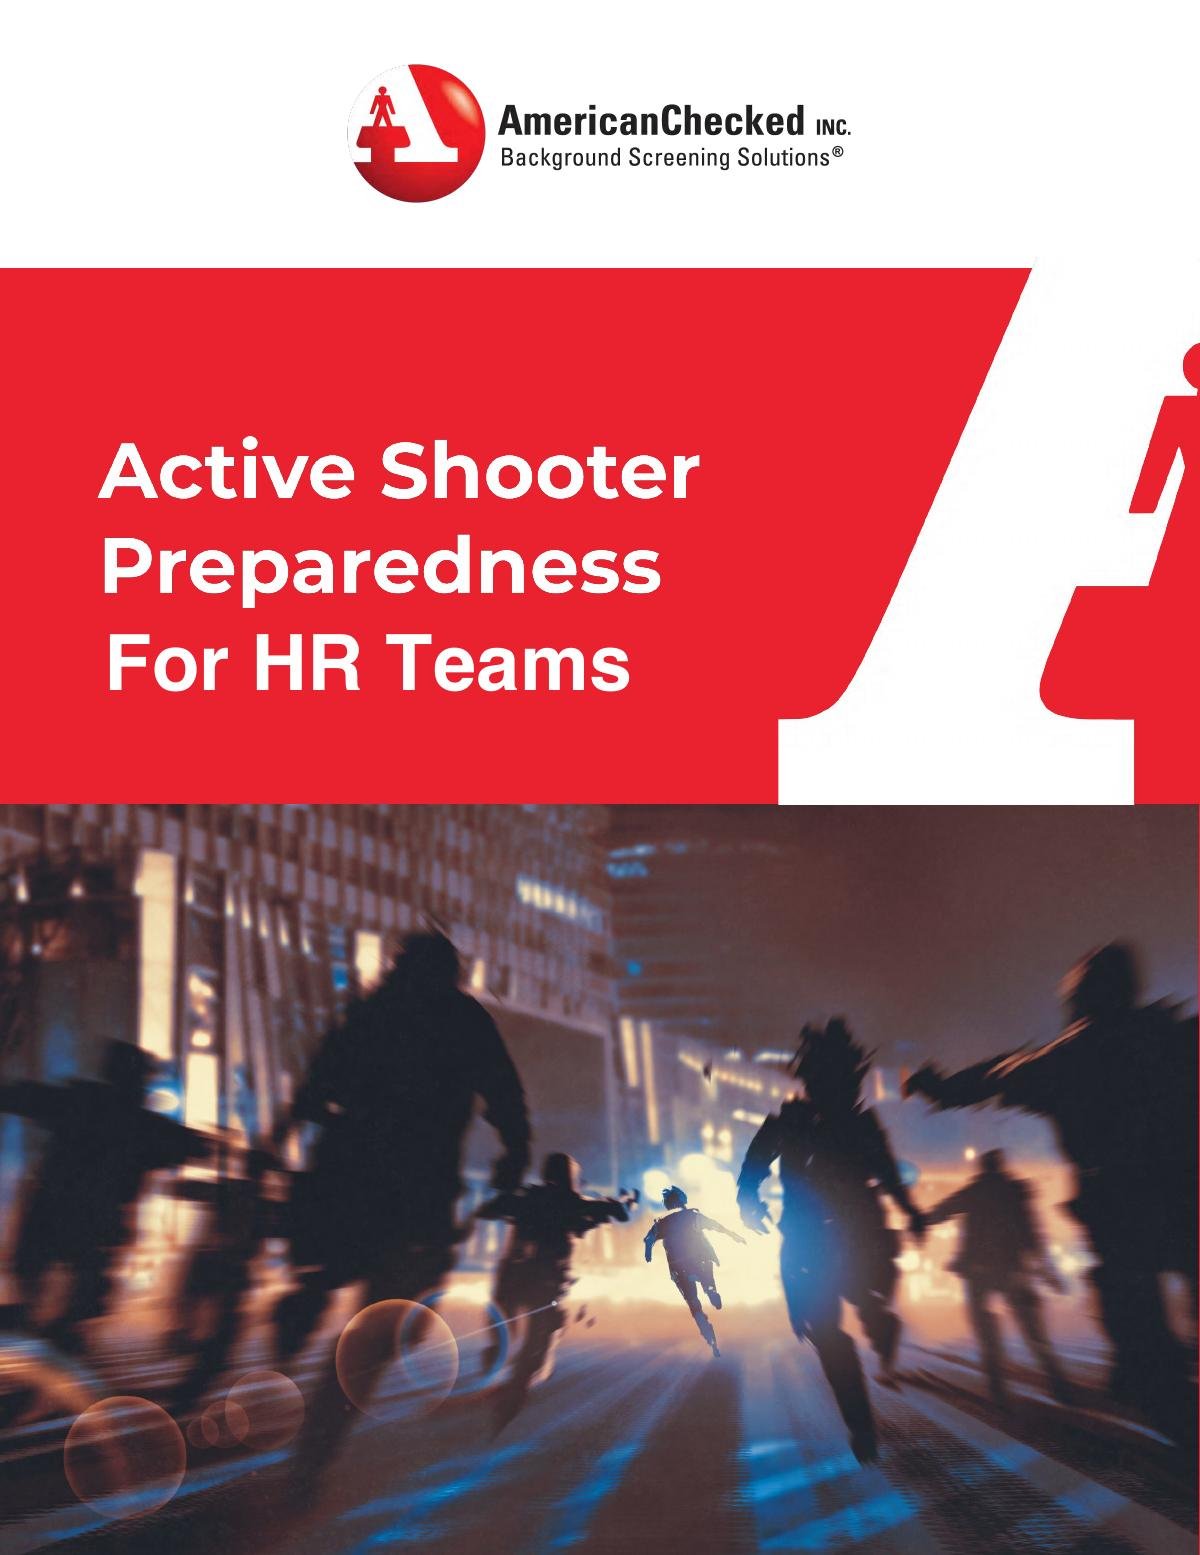 Active Shooter Situation: What to do When the Unthinkable Happens